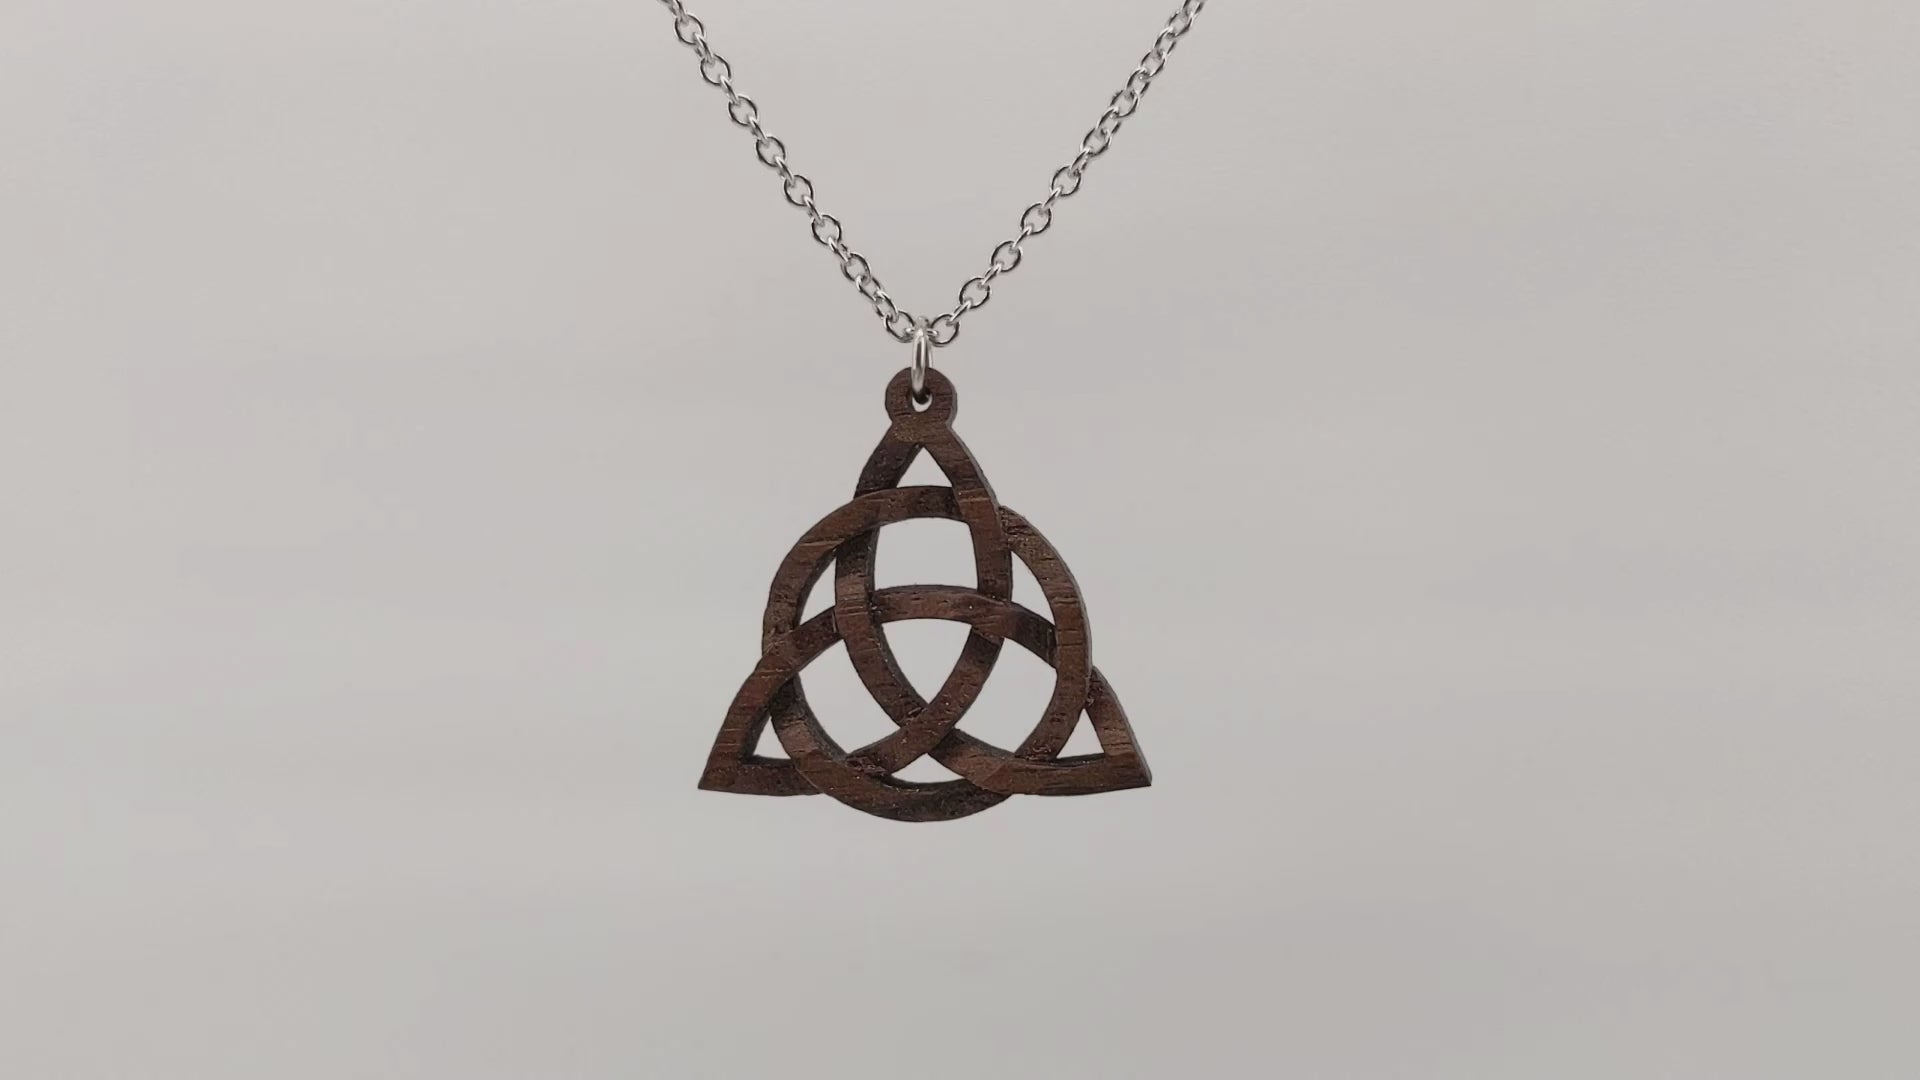 Wooden necklace pendant created in the style of a Celtic woven trinity symbol. Made from hard maple. Hanging and rotating from a silver stainless steel chain against a white background.